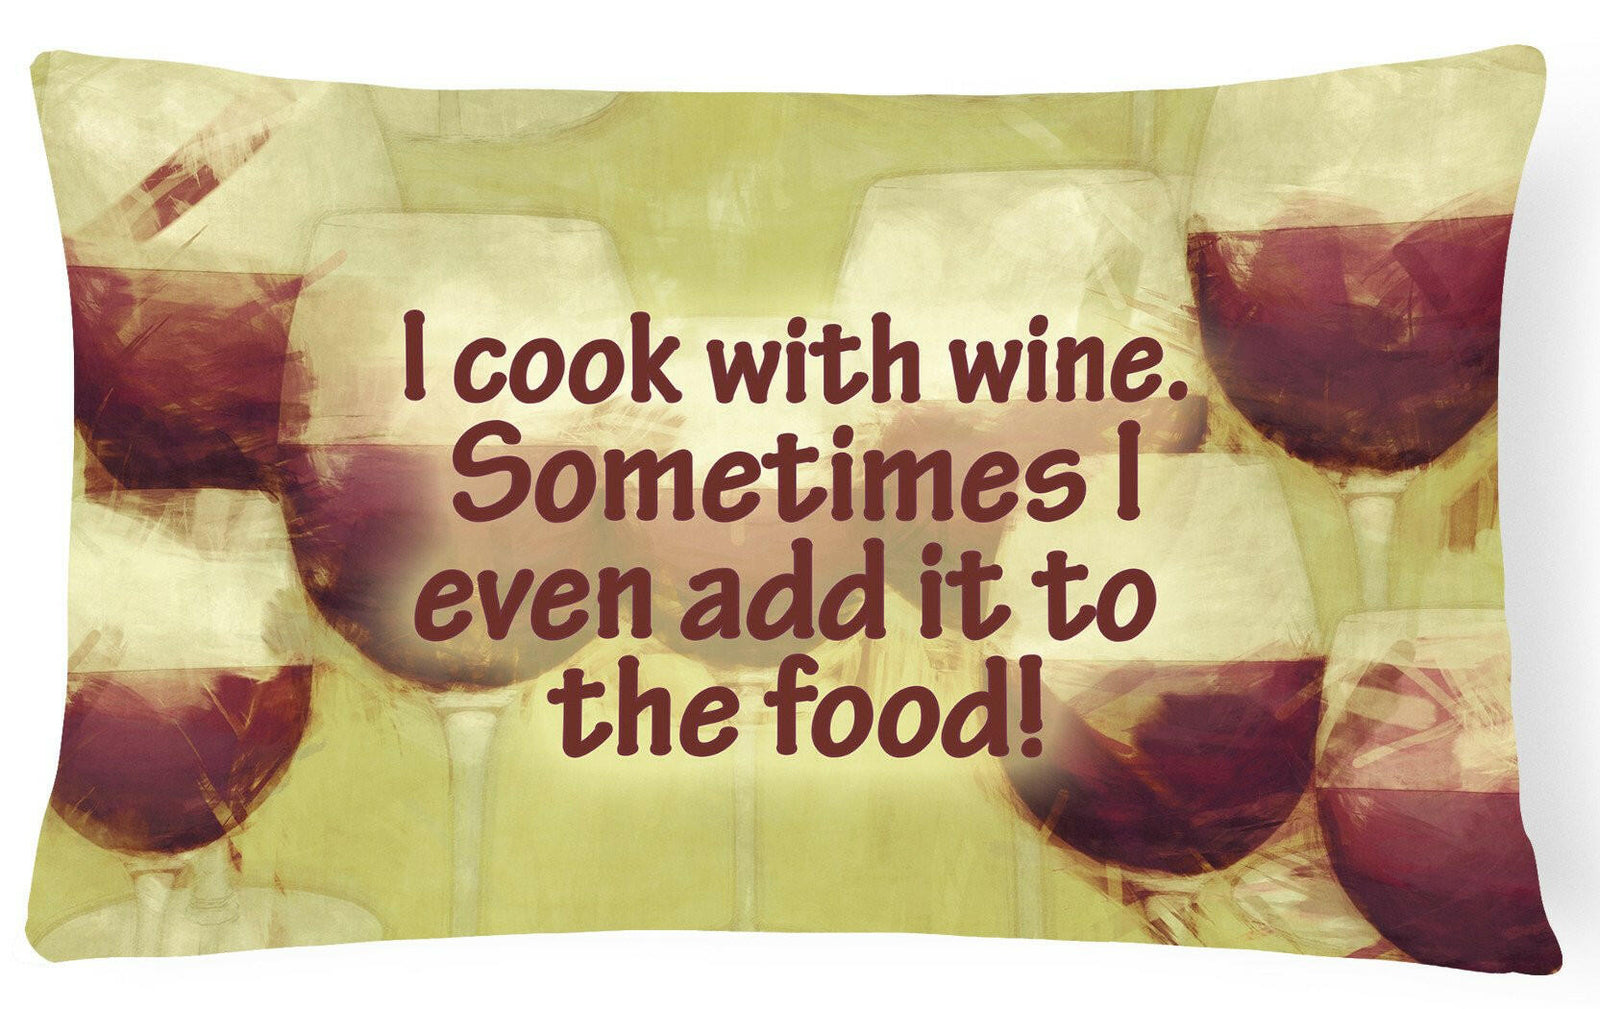 I cook with wine   Canvas Fabric Decorative Pillow SB3069PW1216 by Caroline's Treasures